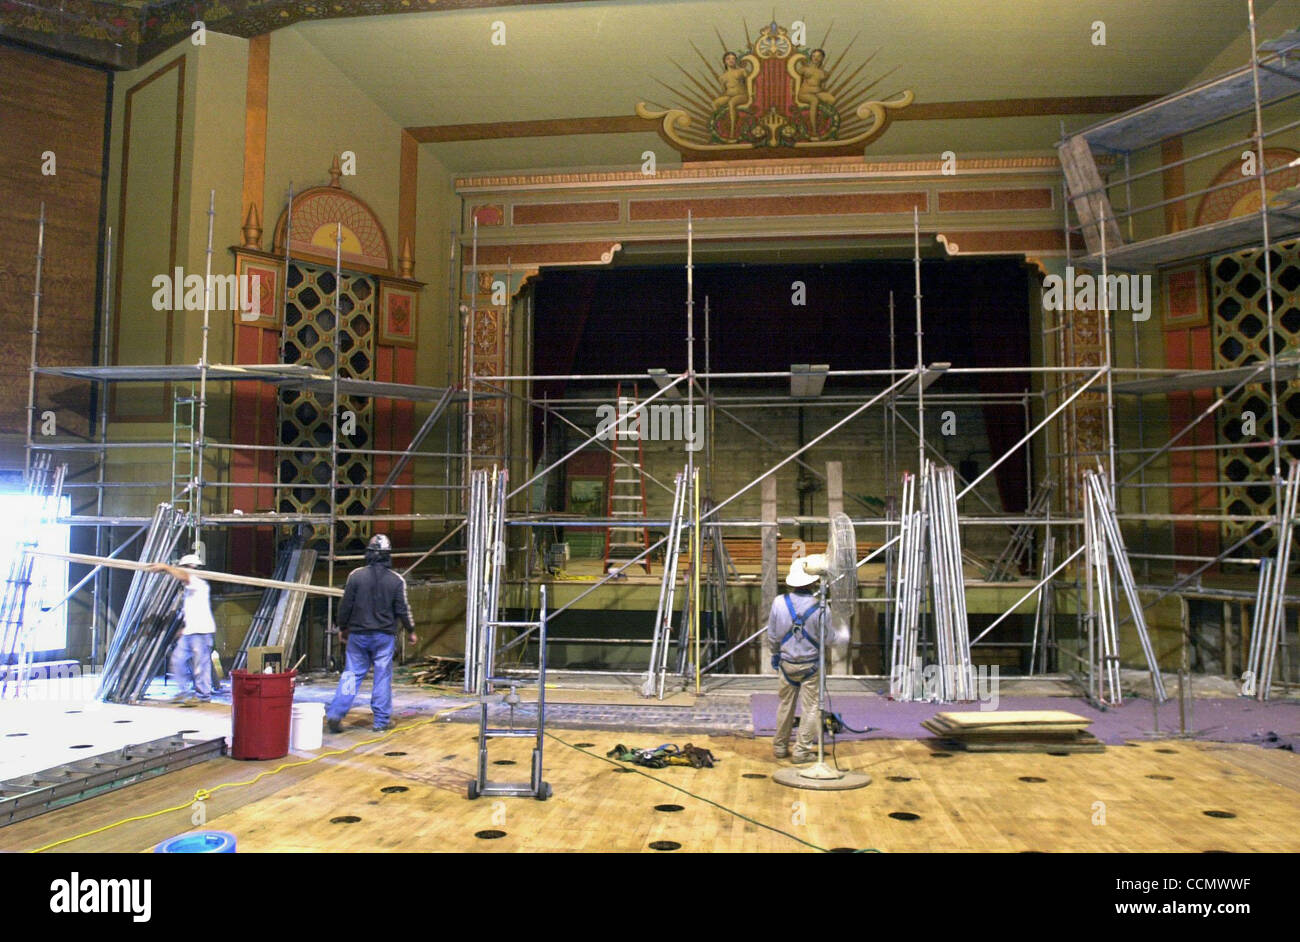 ON THE FRONT---John Sauter, left, Ken Pharris and Rudy Reyes remove the scaffolding after the repainting of the interior of the El Campanil Theatre an ornate 1920's art deco theater in downtown Antioch California on Friday, April 23, 2004.  (Contra Costa Times/HERMAN BUSTAMANTE JR.) Stock Photo